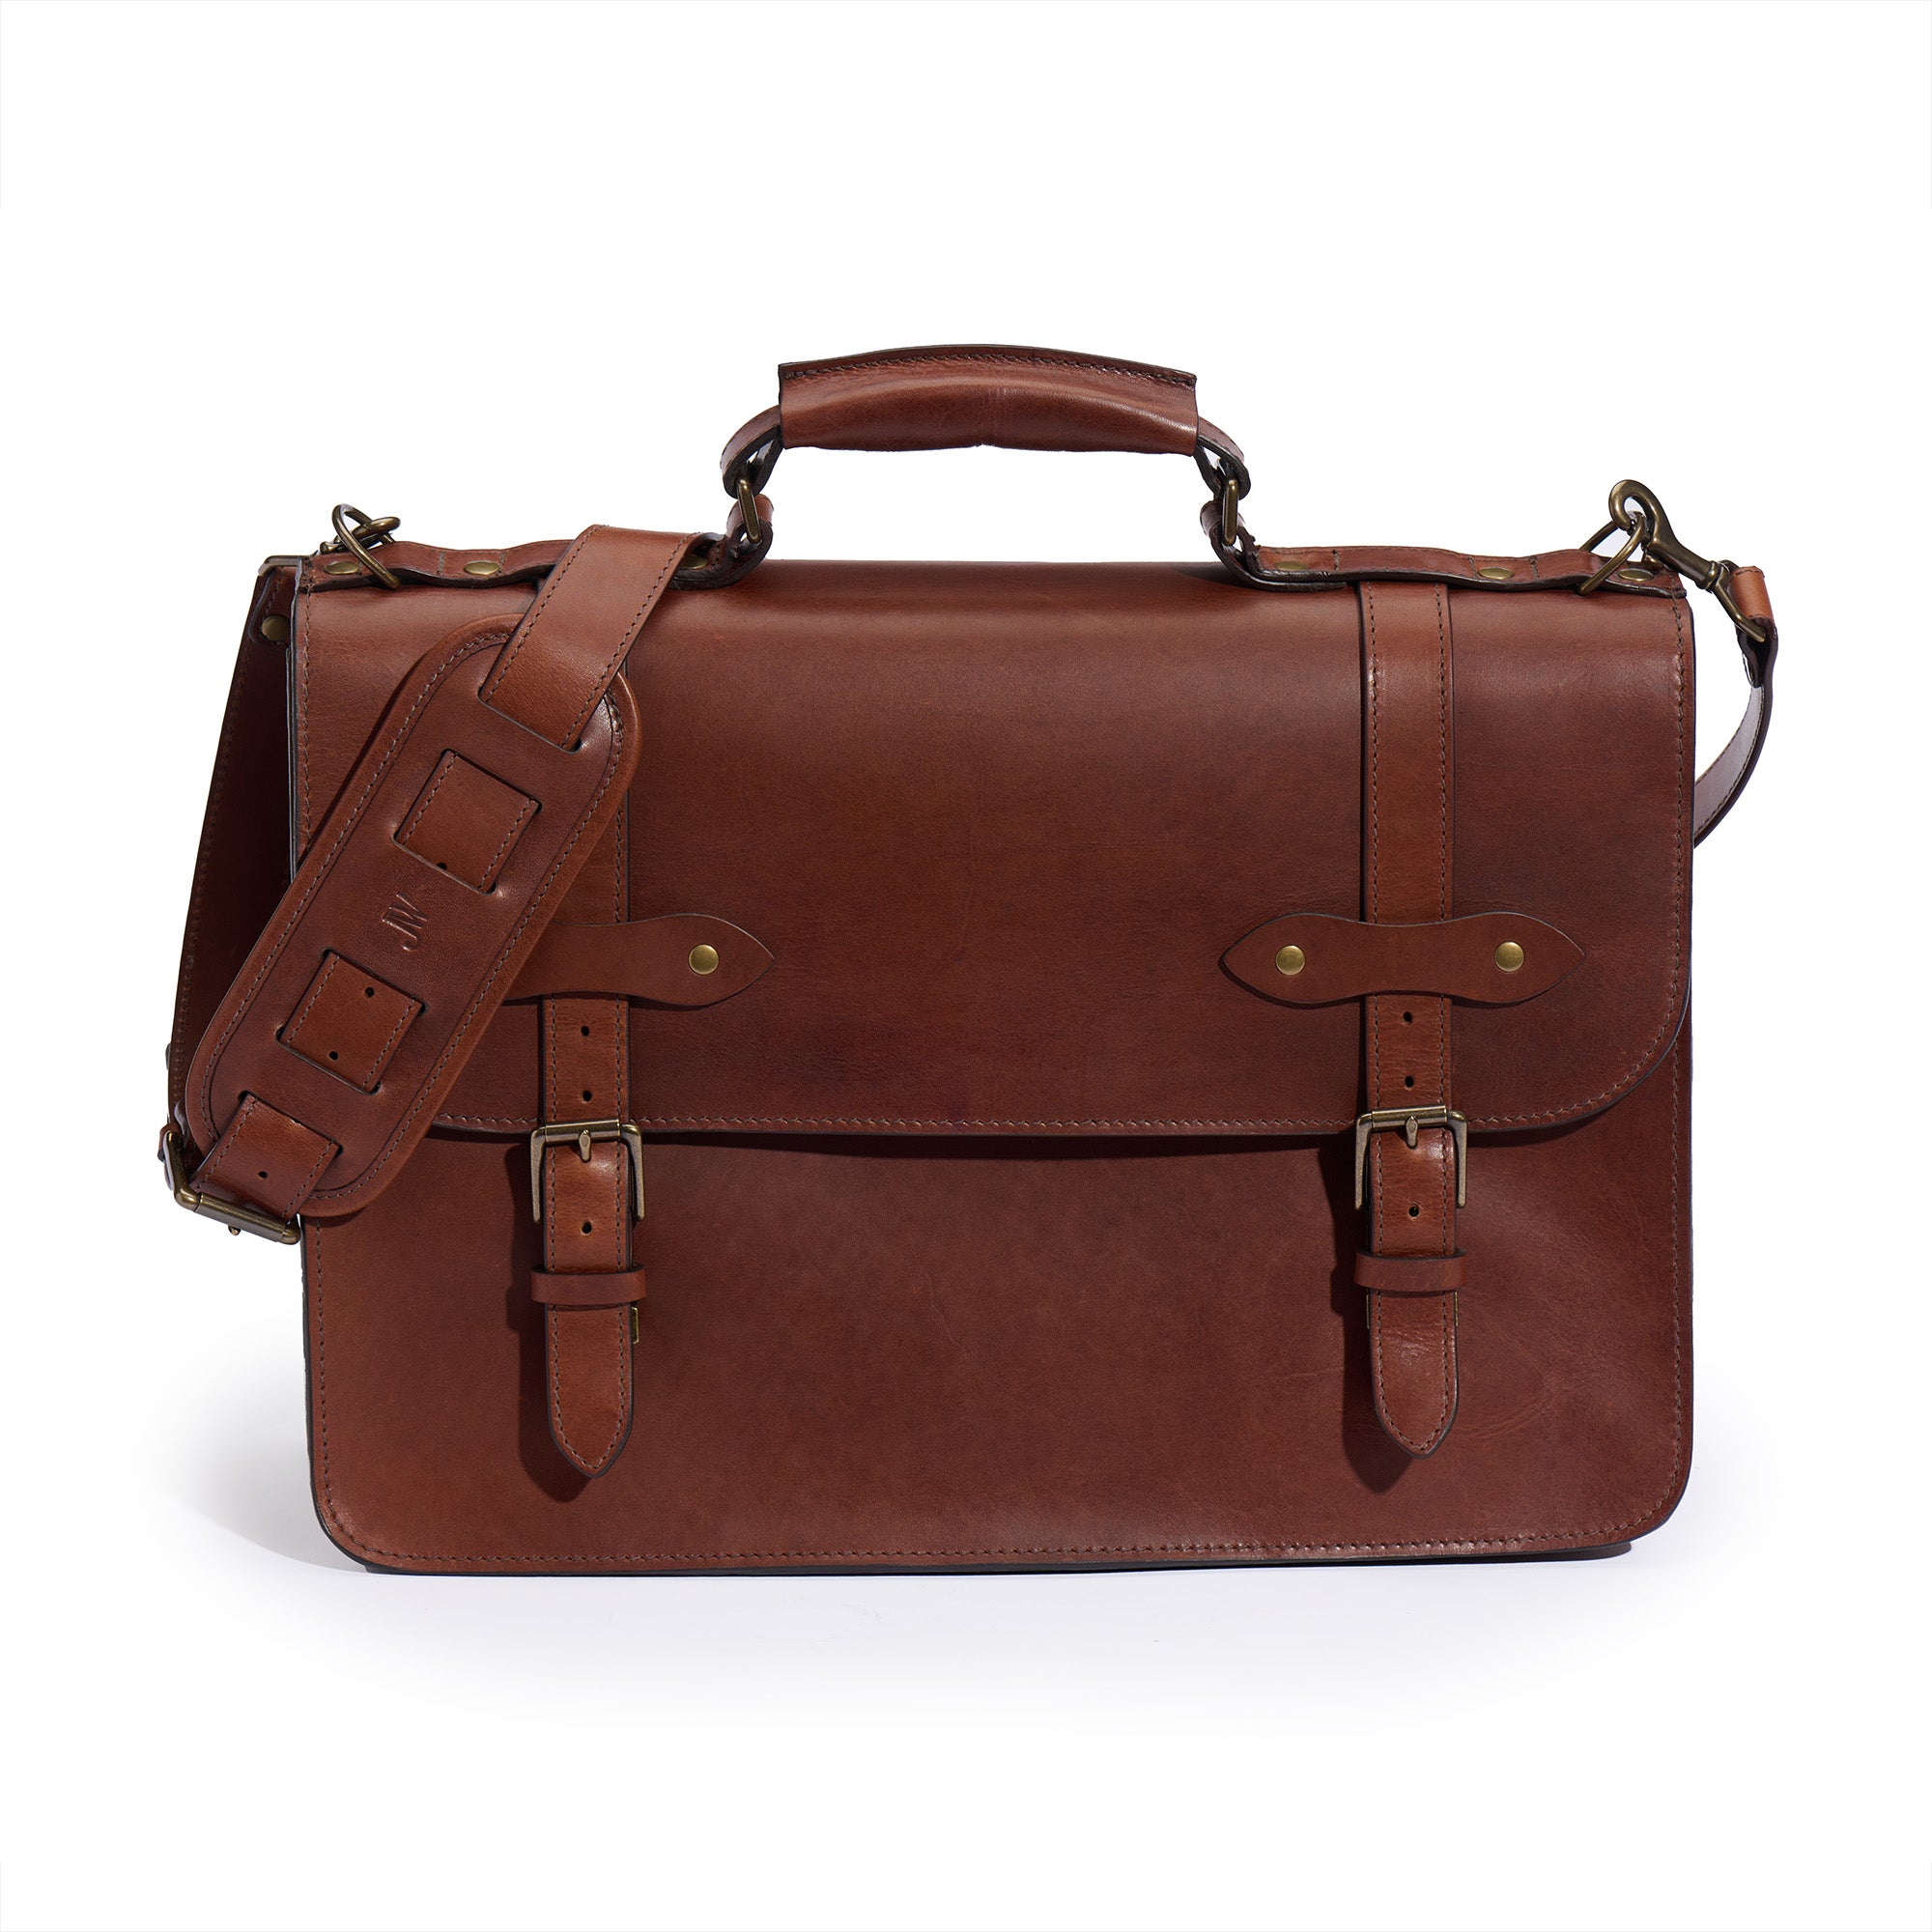 Of Murse and Men: A Look at the Saddleback Classic Briefcase for Trial  Lawyers | 🅿🅷🅸🅻🅻🆈 🅻🅰🆆 🅱🅻🅾🅶